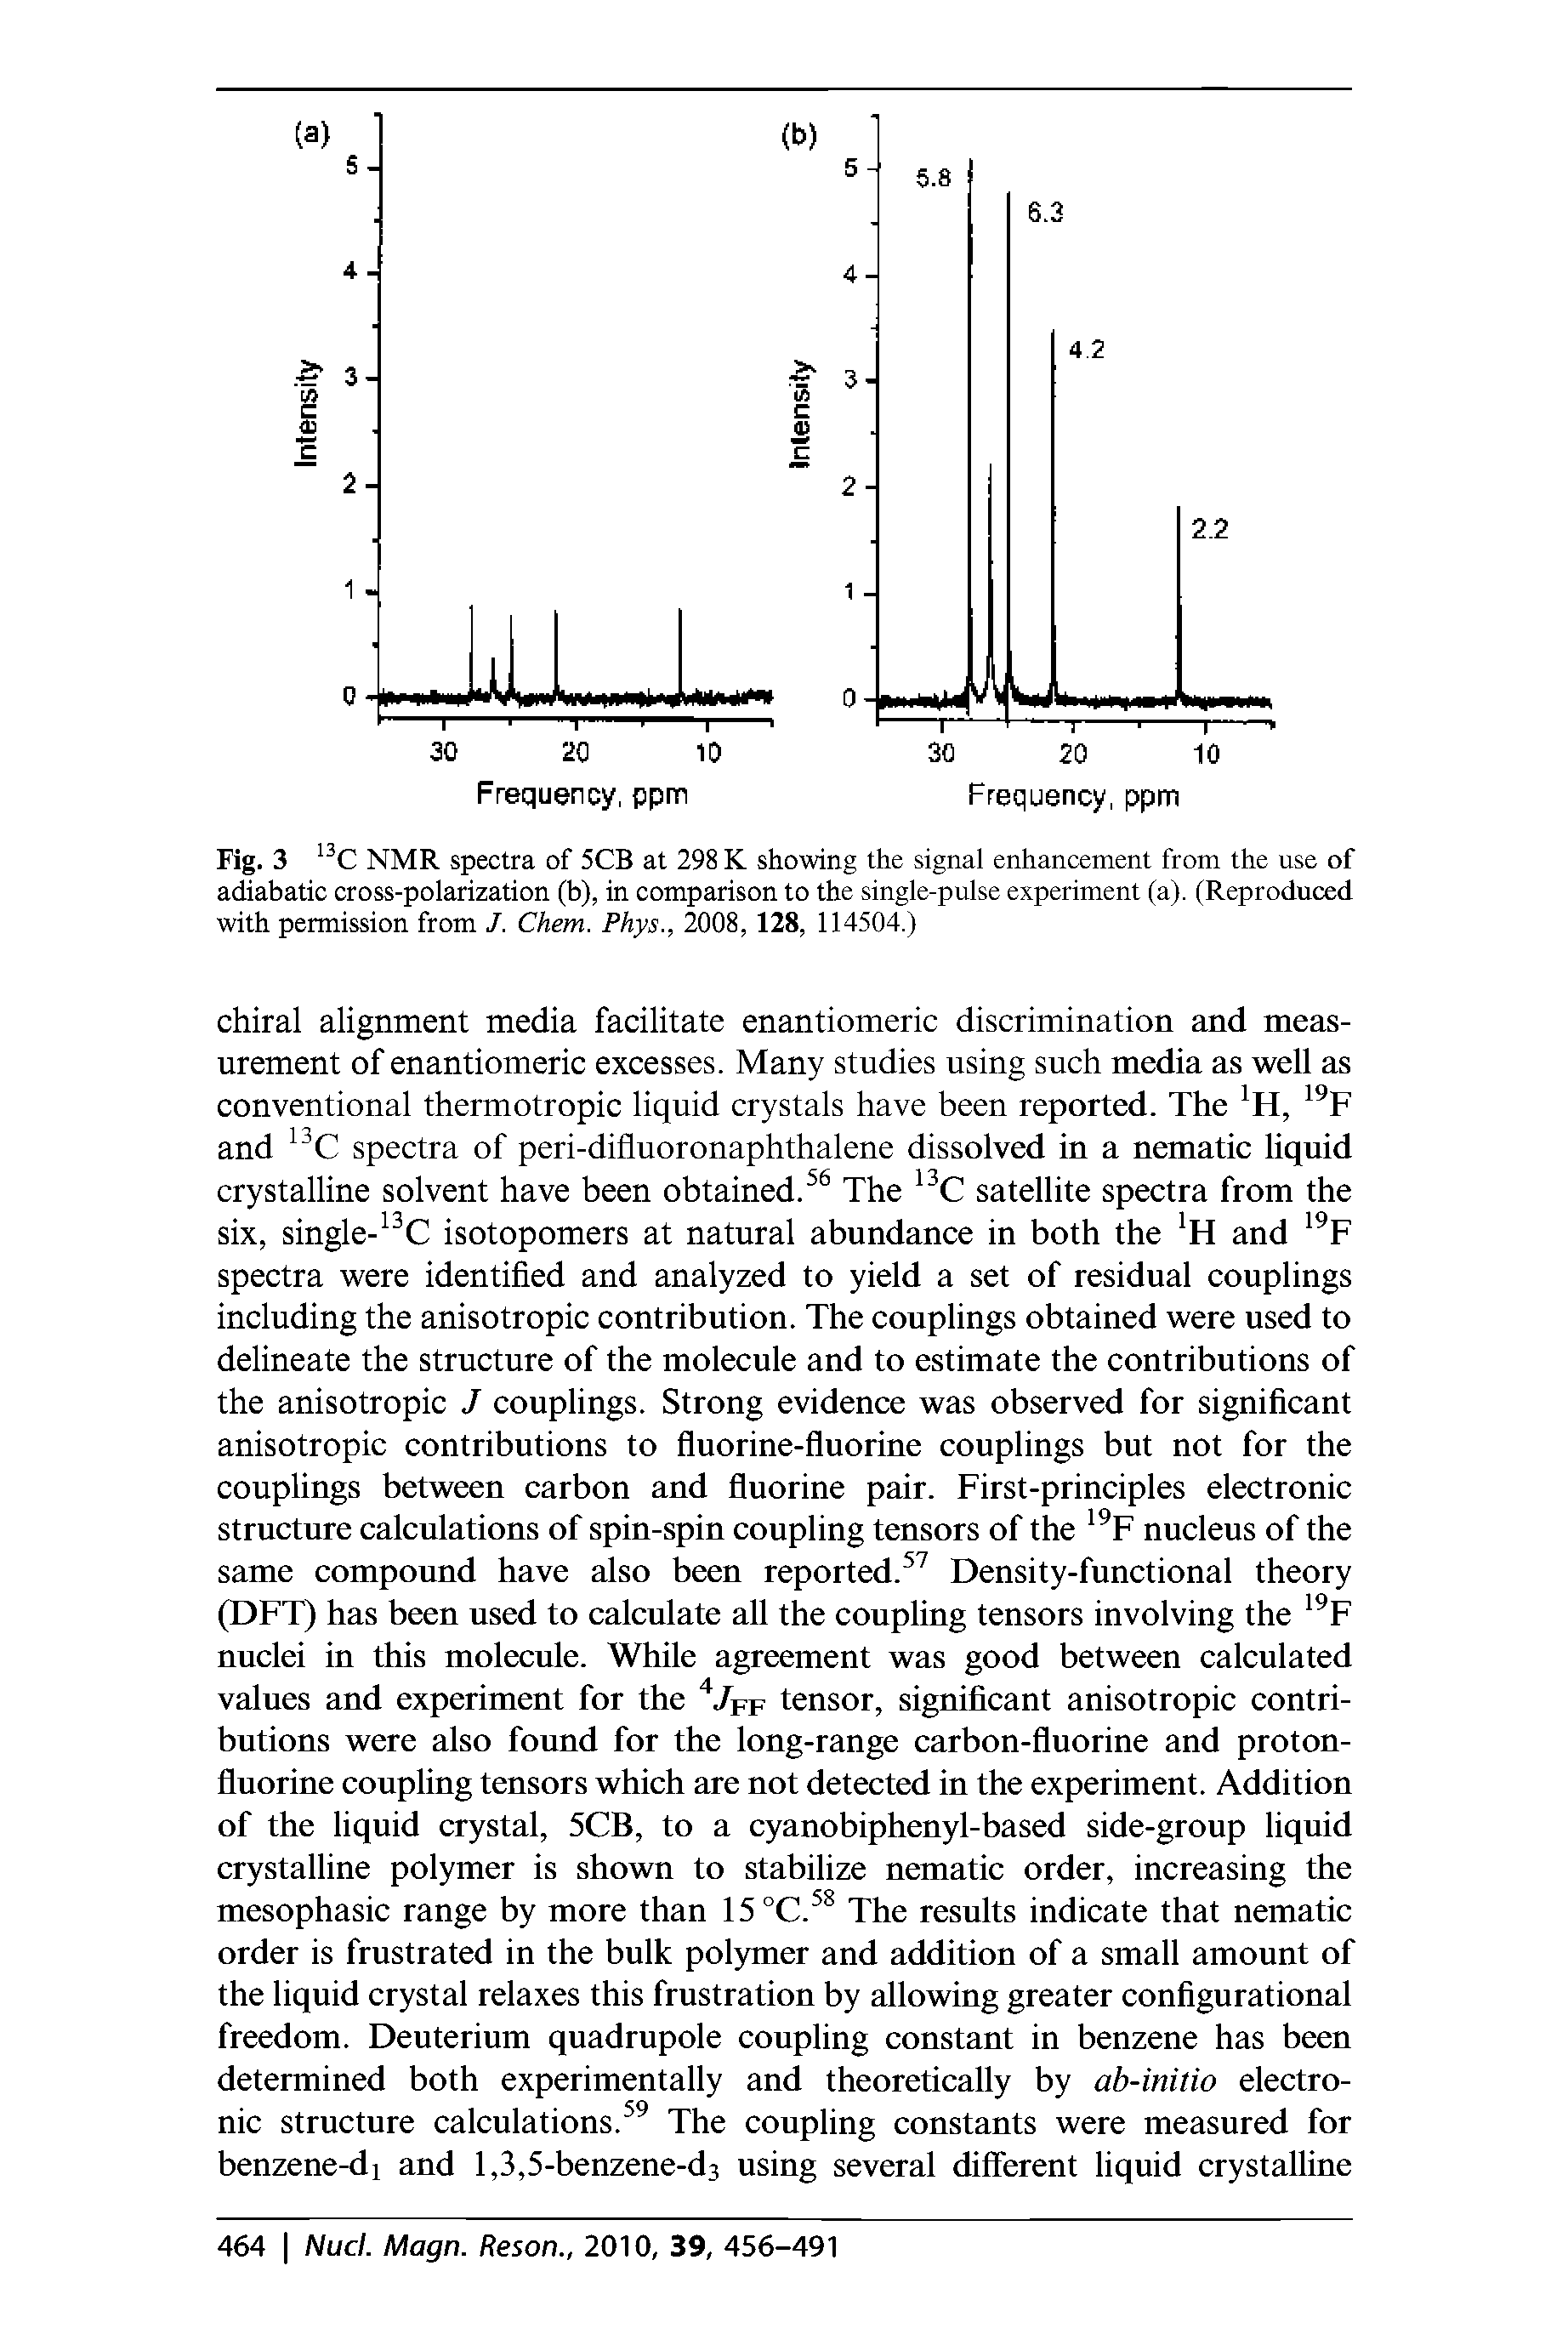 Fig. 3 NMR spectra of 5CB at 298 K showing the signal enhancement from the use of adiabatic cross-polarization (b), in comparison to the single-pulse experiment (a). (Reproduced with permission from J. Chem. Phys., 2008, 128, 114504.)...